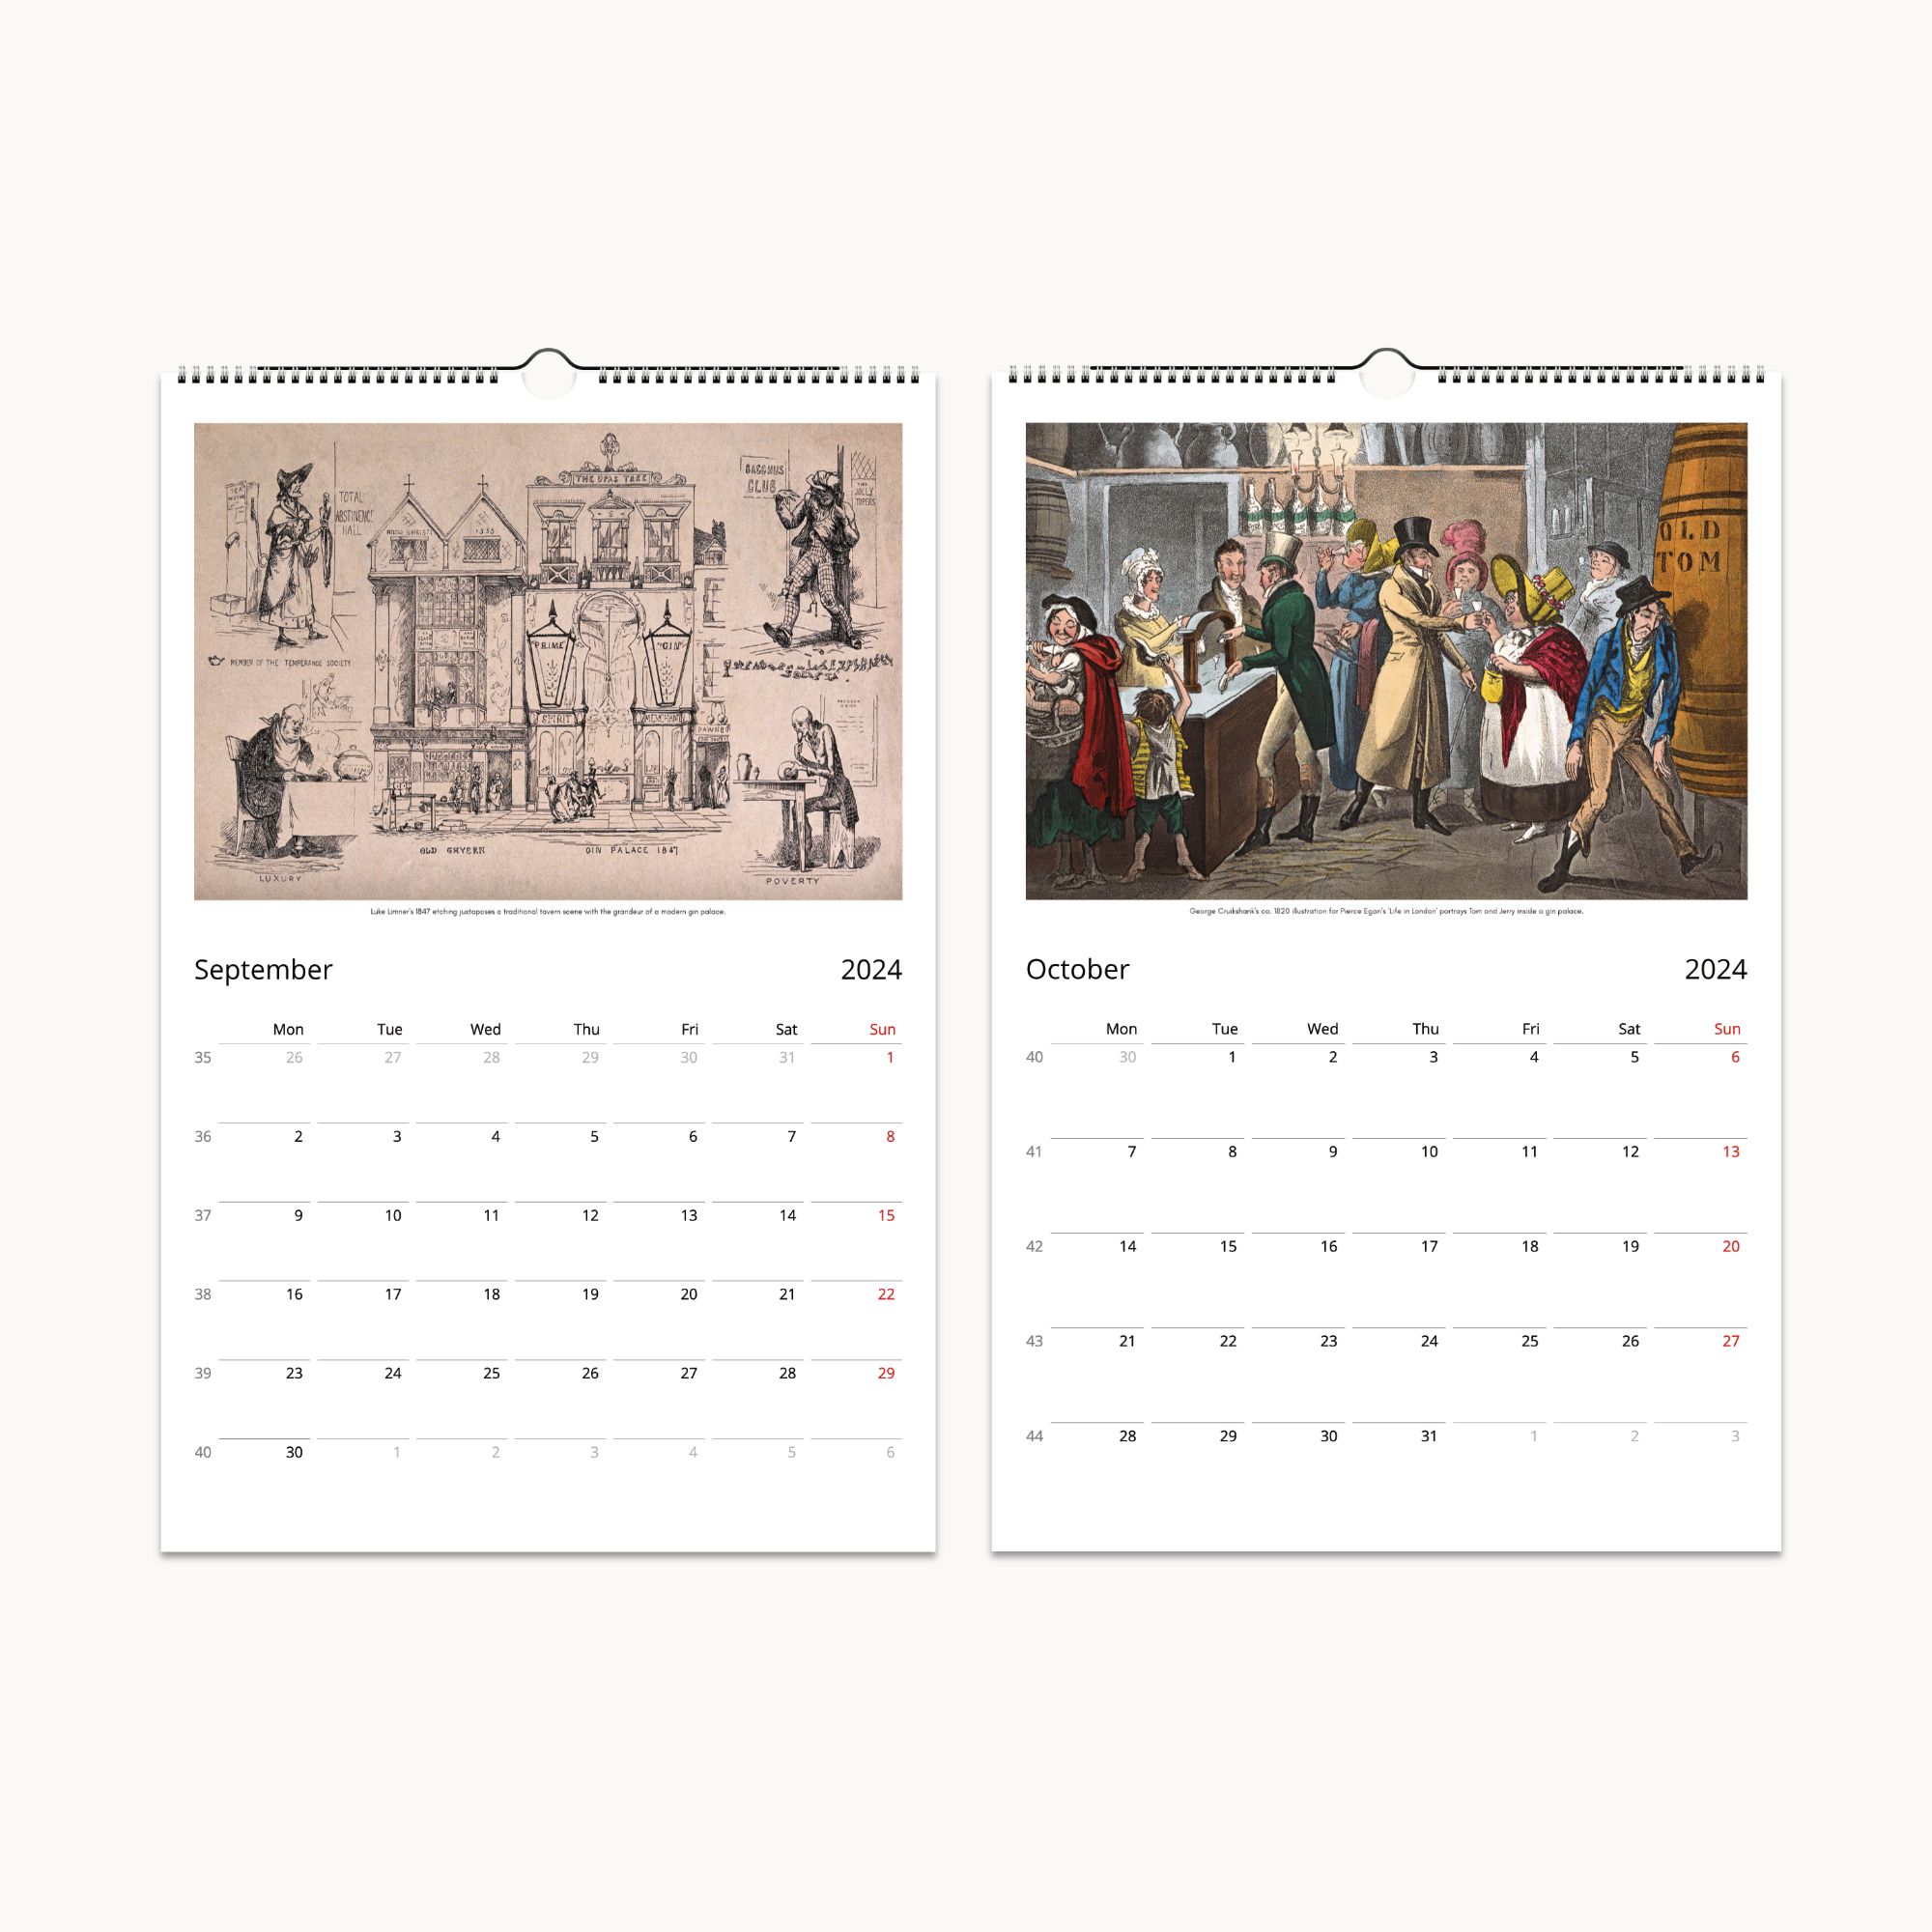 Artistic representation of England's gin history from 1700–1850, as featured in the 2024 Gin Chronicles Wall Calendar.